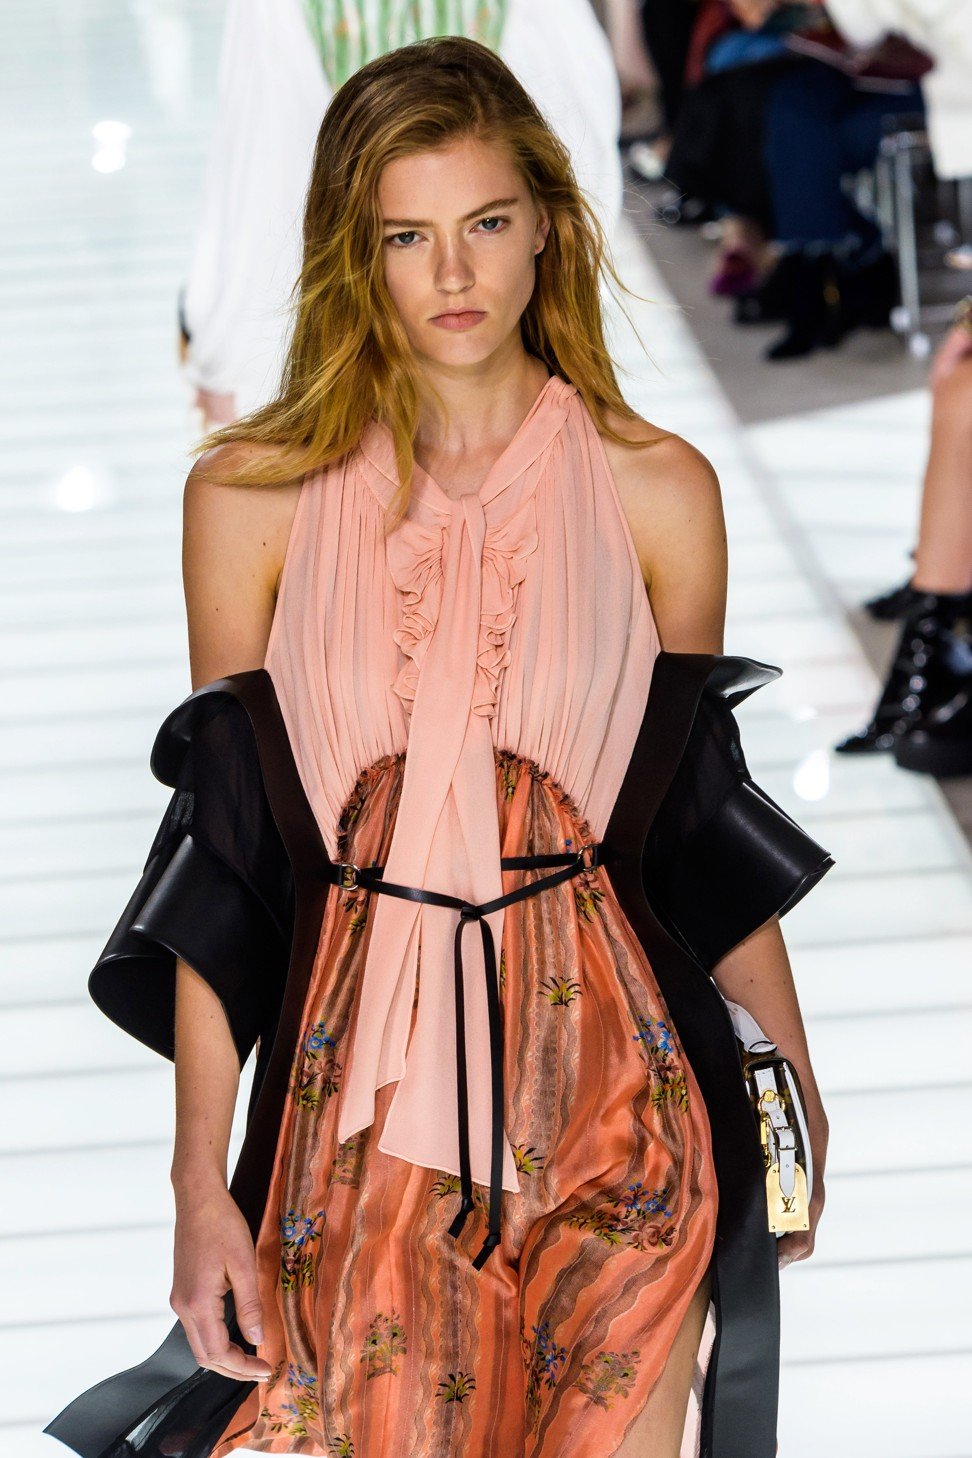 Louis Vuitton's Nicolas Ghesquière infuses sporty chic with aristocratic high  fashion in Paris